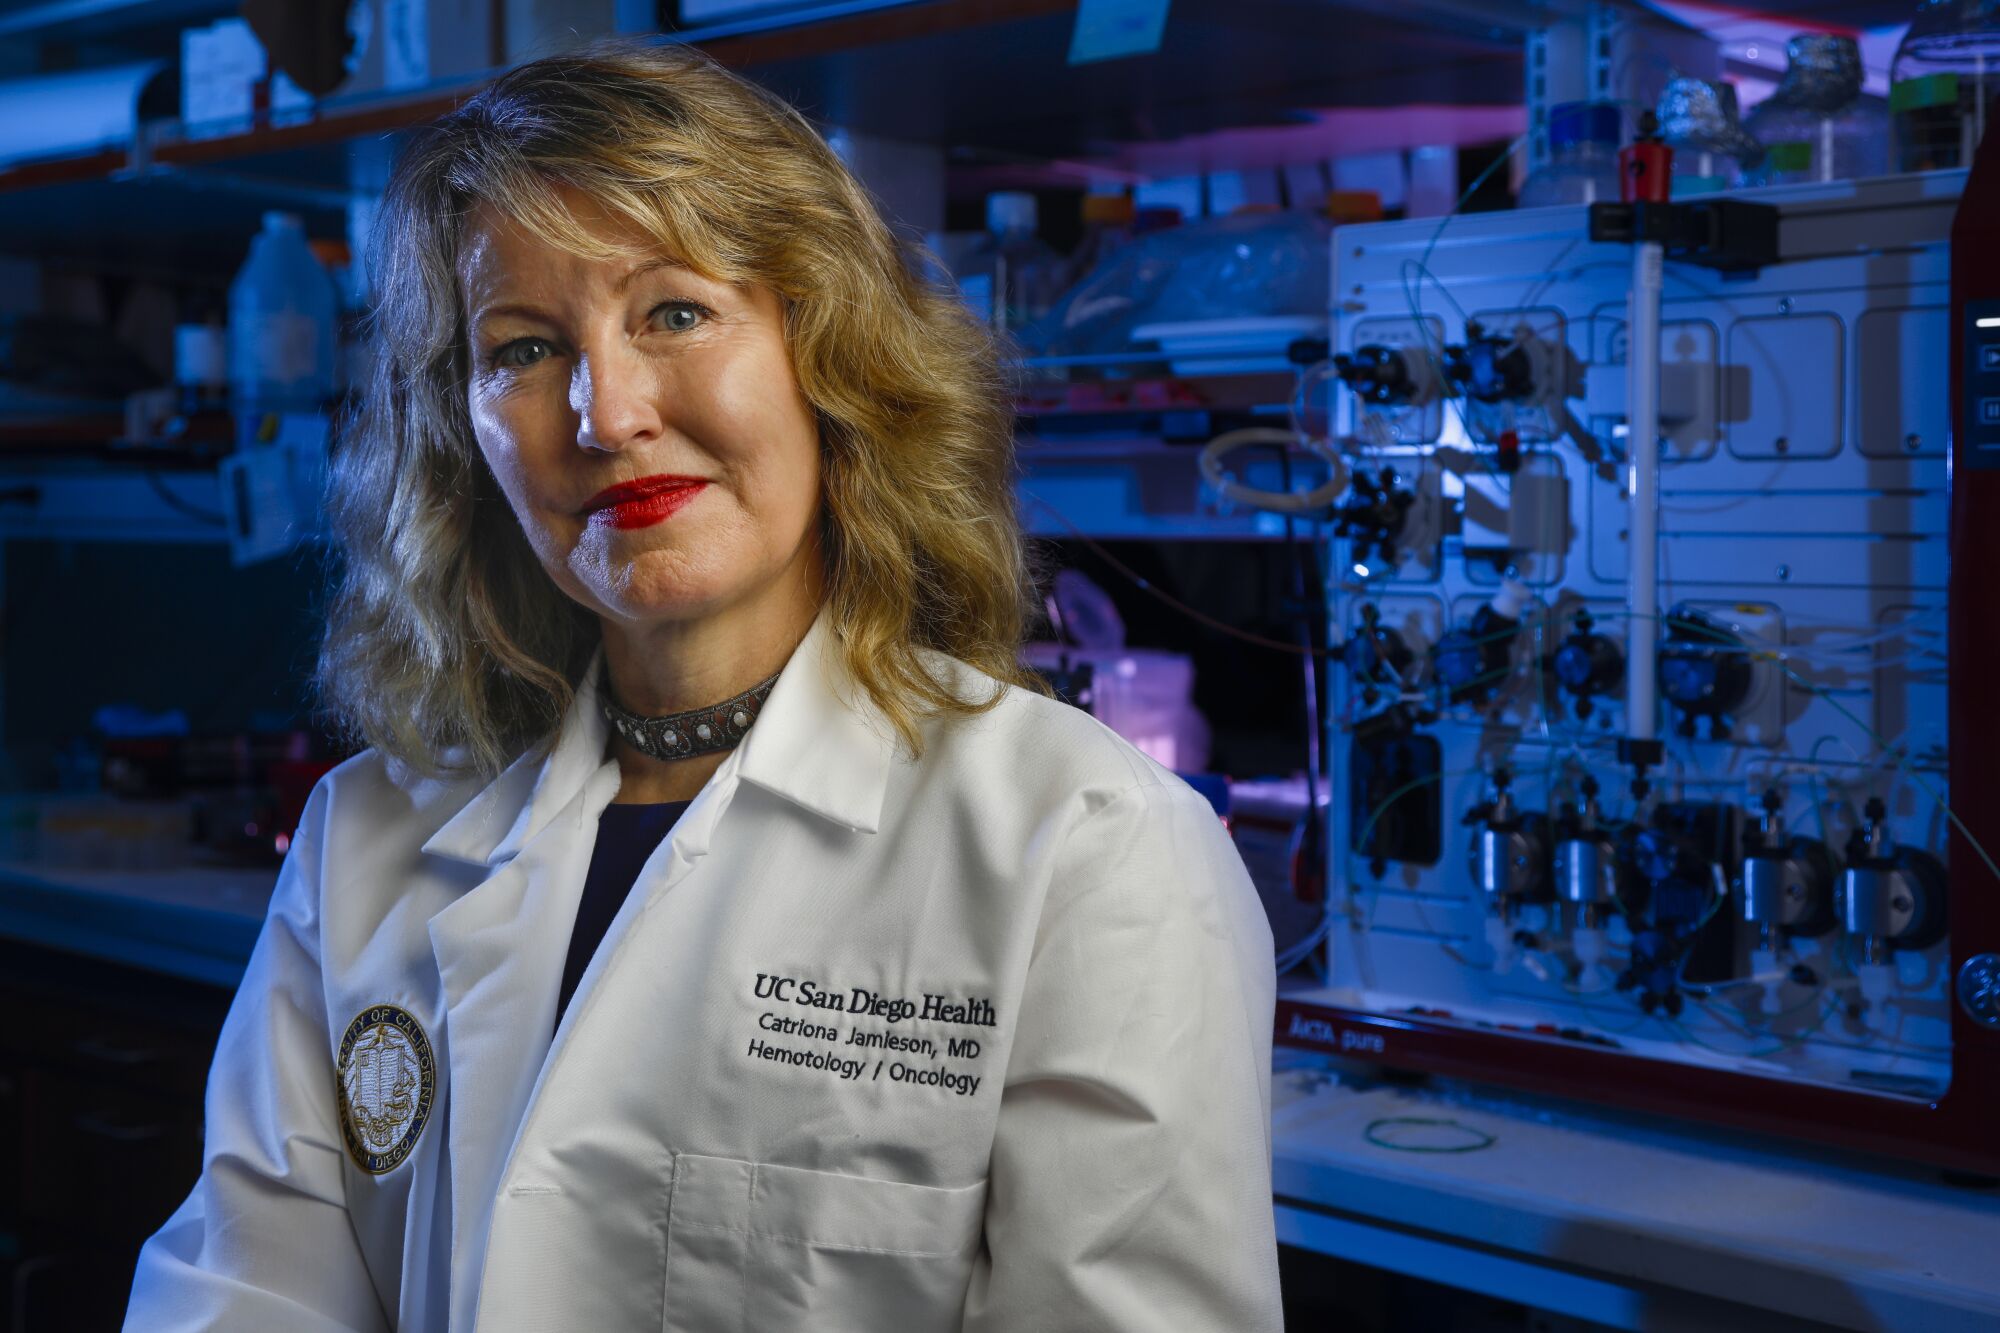 Dr. Catriona Jamieson treats patients with blood cancers. The UCSD oncologist is also a researcher who helped prove that a recently approved cancer drug, fedratinib, was a good candidate for clinical testing. Jamieson is shown in her lab at the Sanford Consortium for Regenerative Medicine on October 4, 2019, in San Diego.